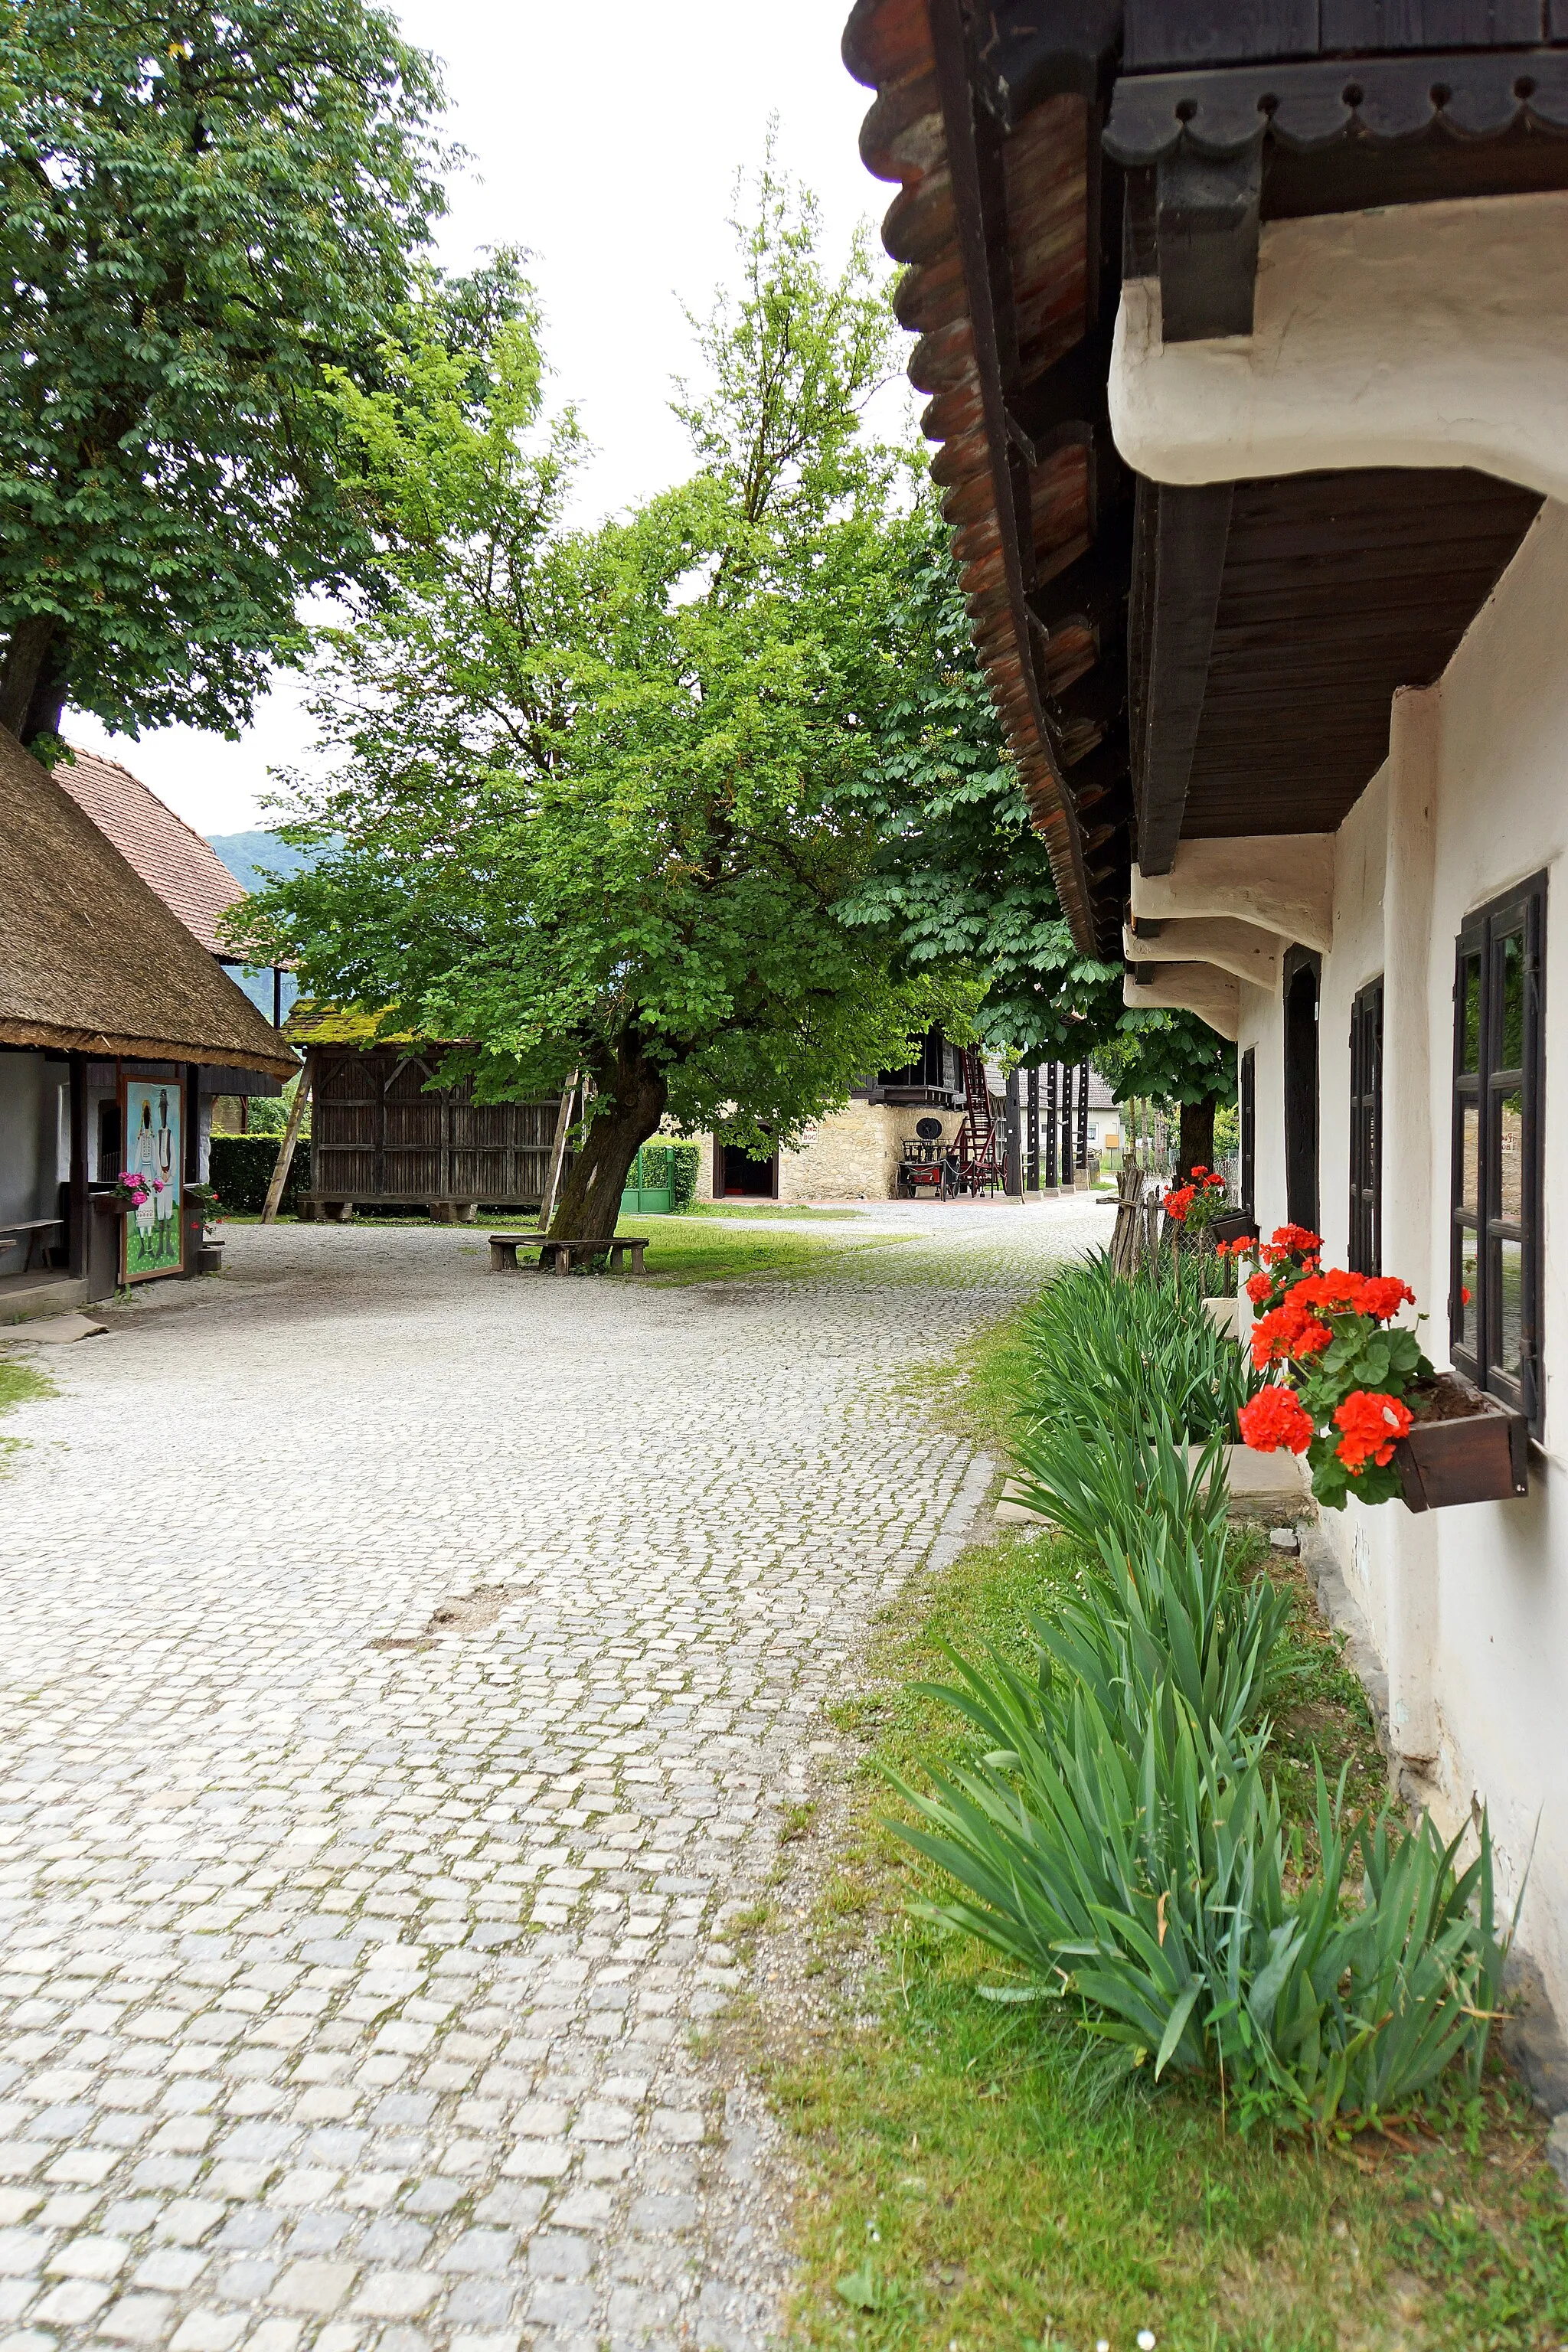 Photo showing: Kumrovec is a village in the northern part Croatia. The Kumrovec village has only 269 people.
The old part of Kumrovec comprises the Ethnological Museum with 18 village houses, displaying permanent exhibitions of artifacts related to the life and work of Zagorje peasants in the 19th/20th century. The village is small but was of great popularity in the former Yugoslavia.

The reconstruction and decoration of these houses started in 1977. So far 40 houses and other farm-stead facilities have been restored, which makes Staro Selo the most attractive place of this kind in Croatia. Visitors may see permanent ethnological exhibitions such as the Zagorje-style Wedding, the Life of Newly-weds, From Hemp to Linen, Blacksmith's Crafts, Cart-wright's Craft, Pottery, From Grain to Bread, etc.